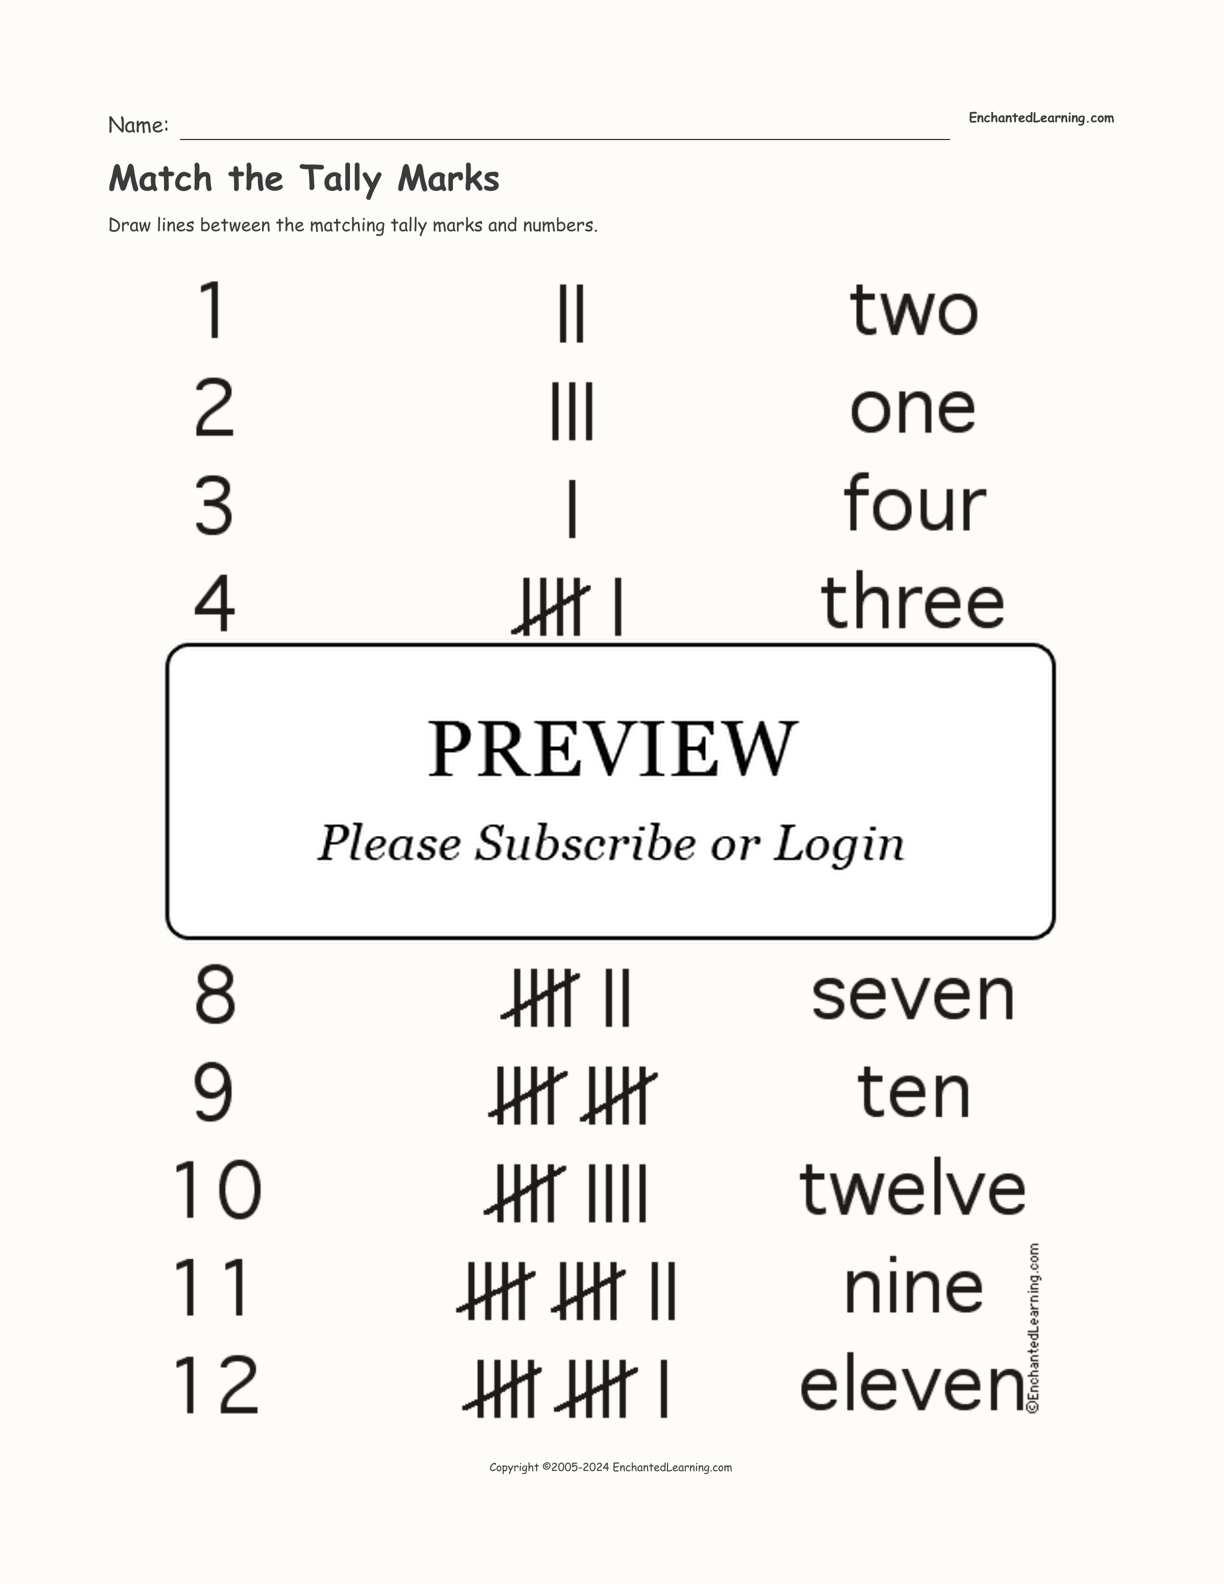 Match the Tally Marks interactive worksheet page 1